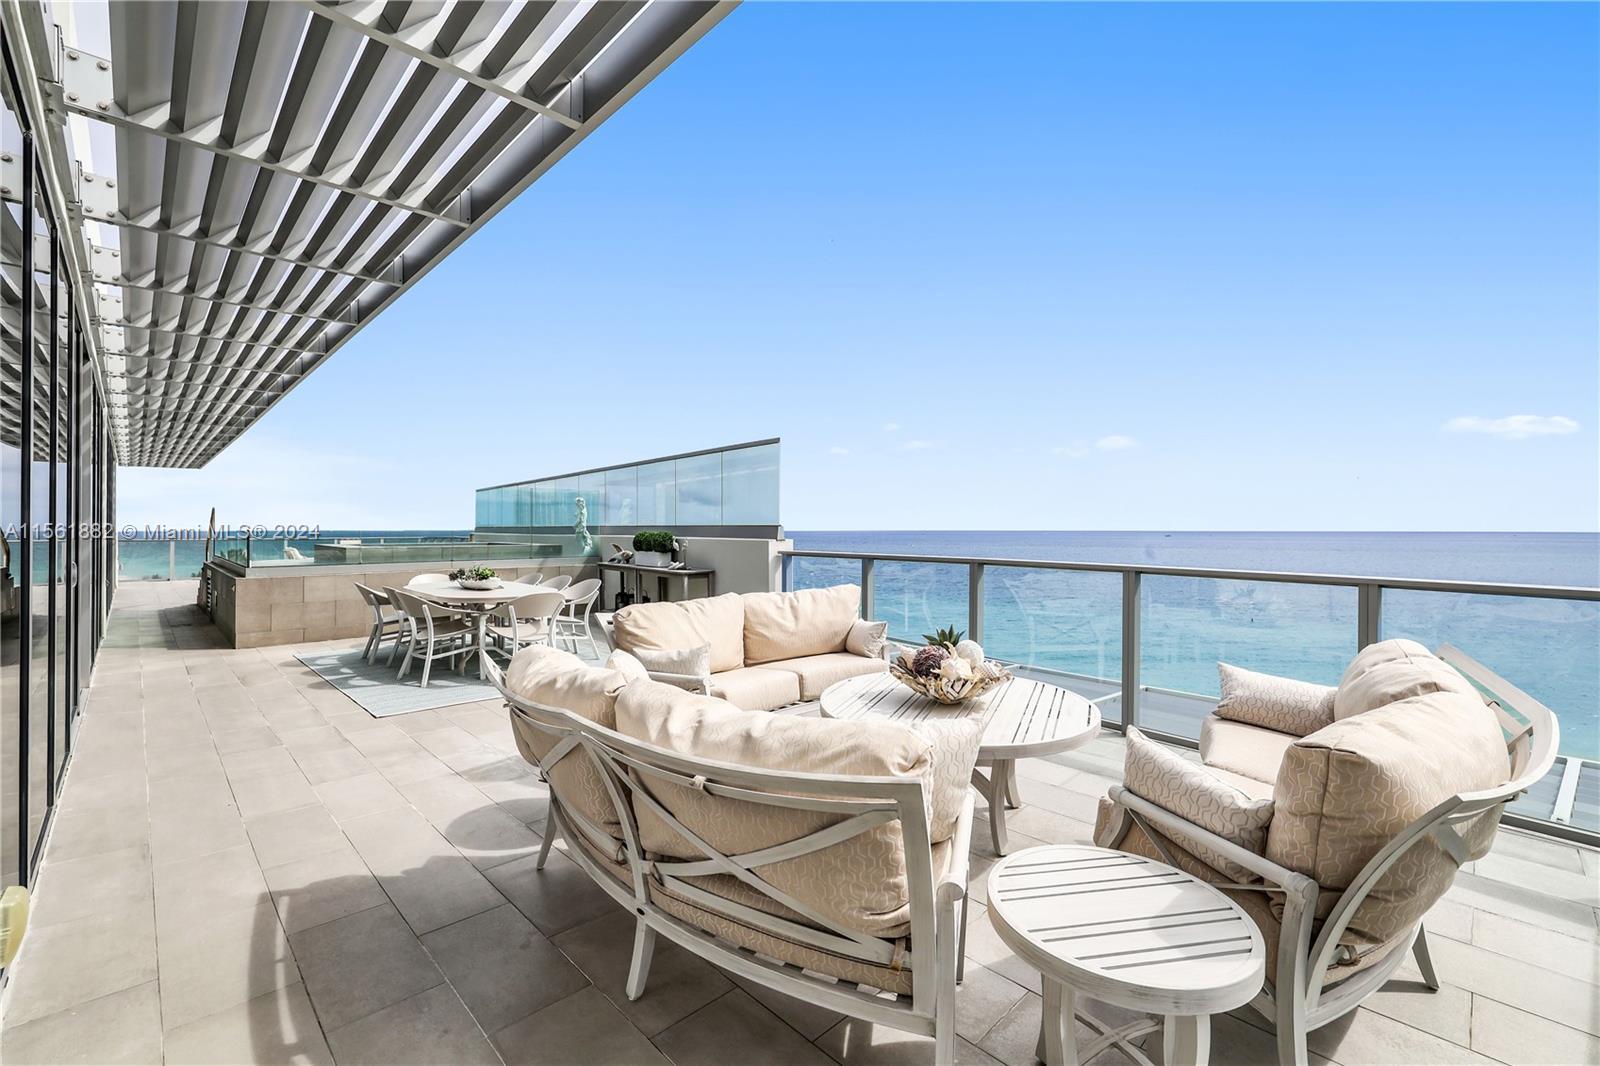 Introducing a rare opportunity to claim one of South Florida’s most idyllic seaside retreats, N605, 